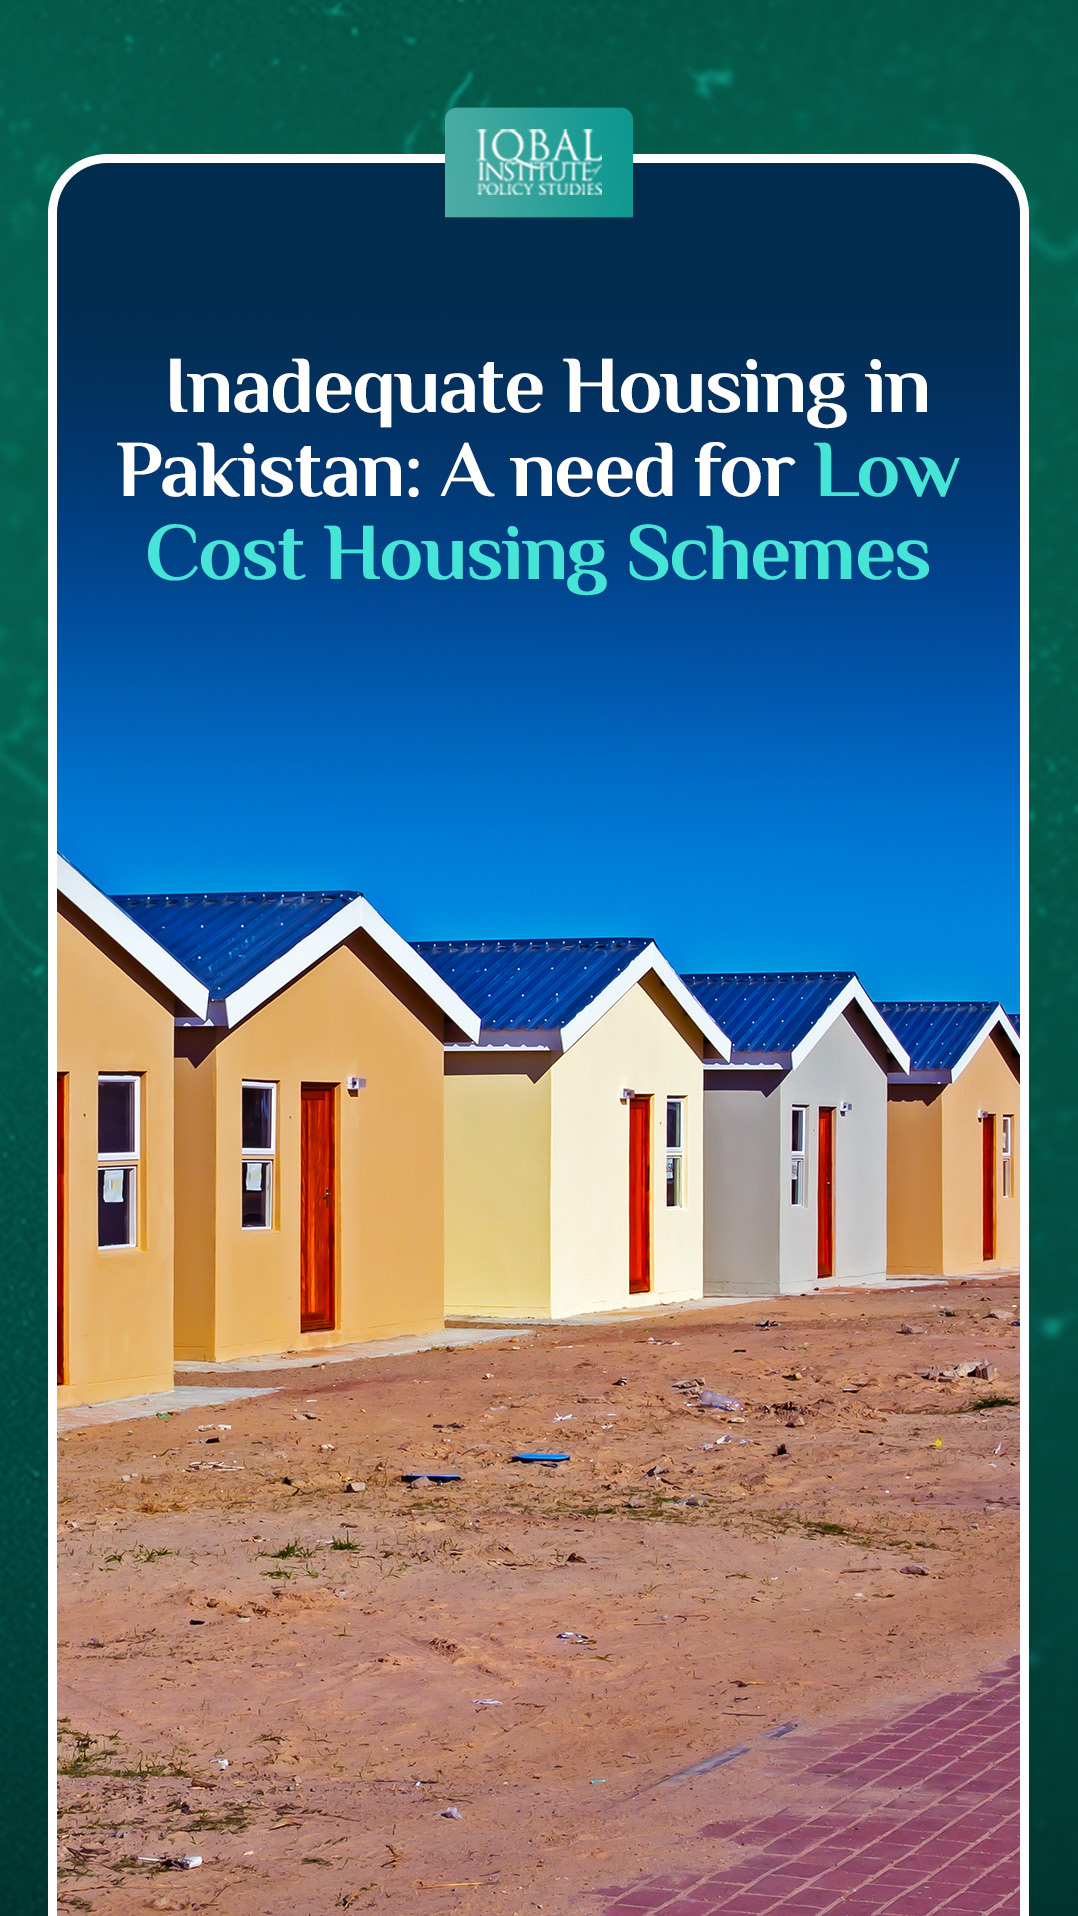 Inadequate Housing in Pakistan: A Need for Low-Cost Housing Schemes